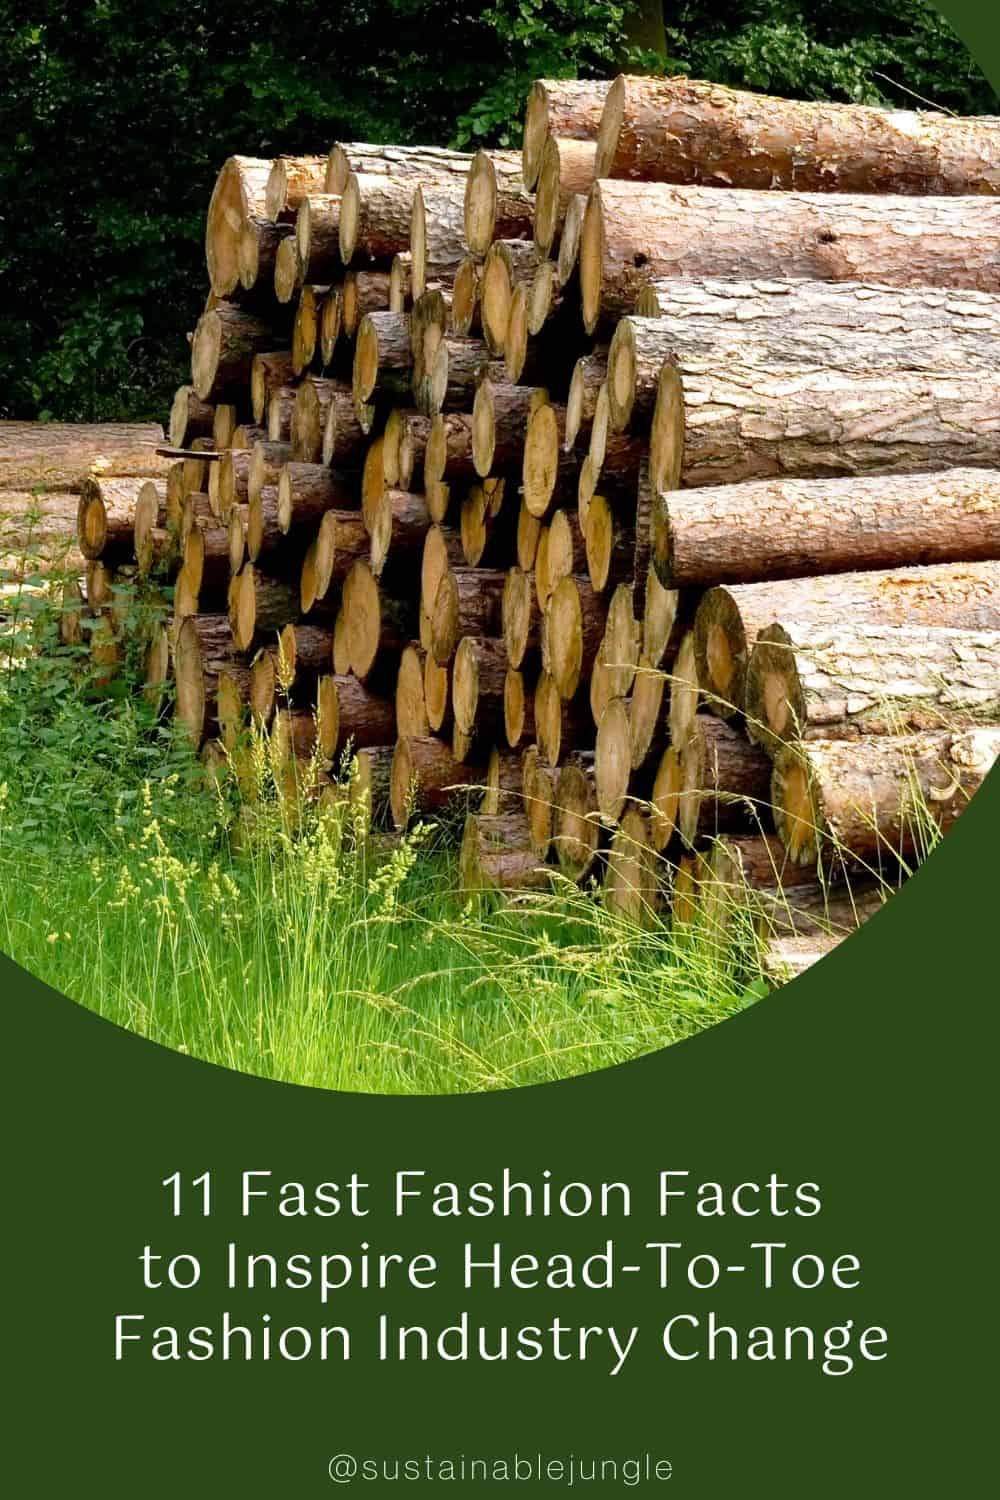 11 Fast Fashion Facts to Inspire Head-To-Toe Fashion Industry Change Image by andrewvee #fastfashionfacts #factsaboutfastfashion #fastfashionstatistics #fastfashionpollutionstatistics #fastfashionwastefacts #sustainablejungle